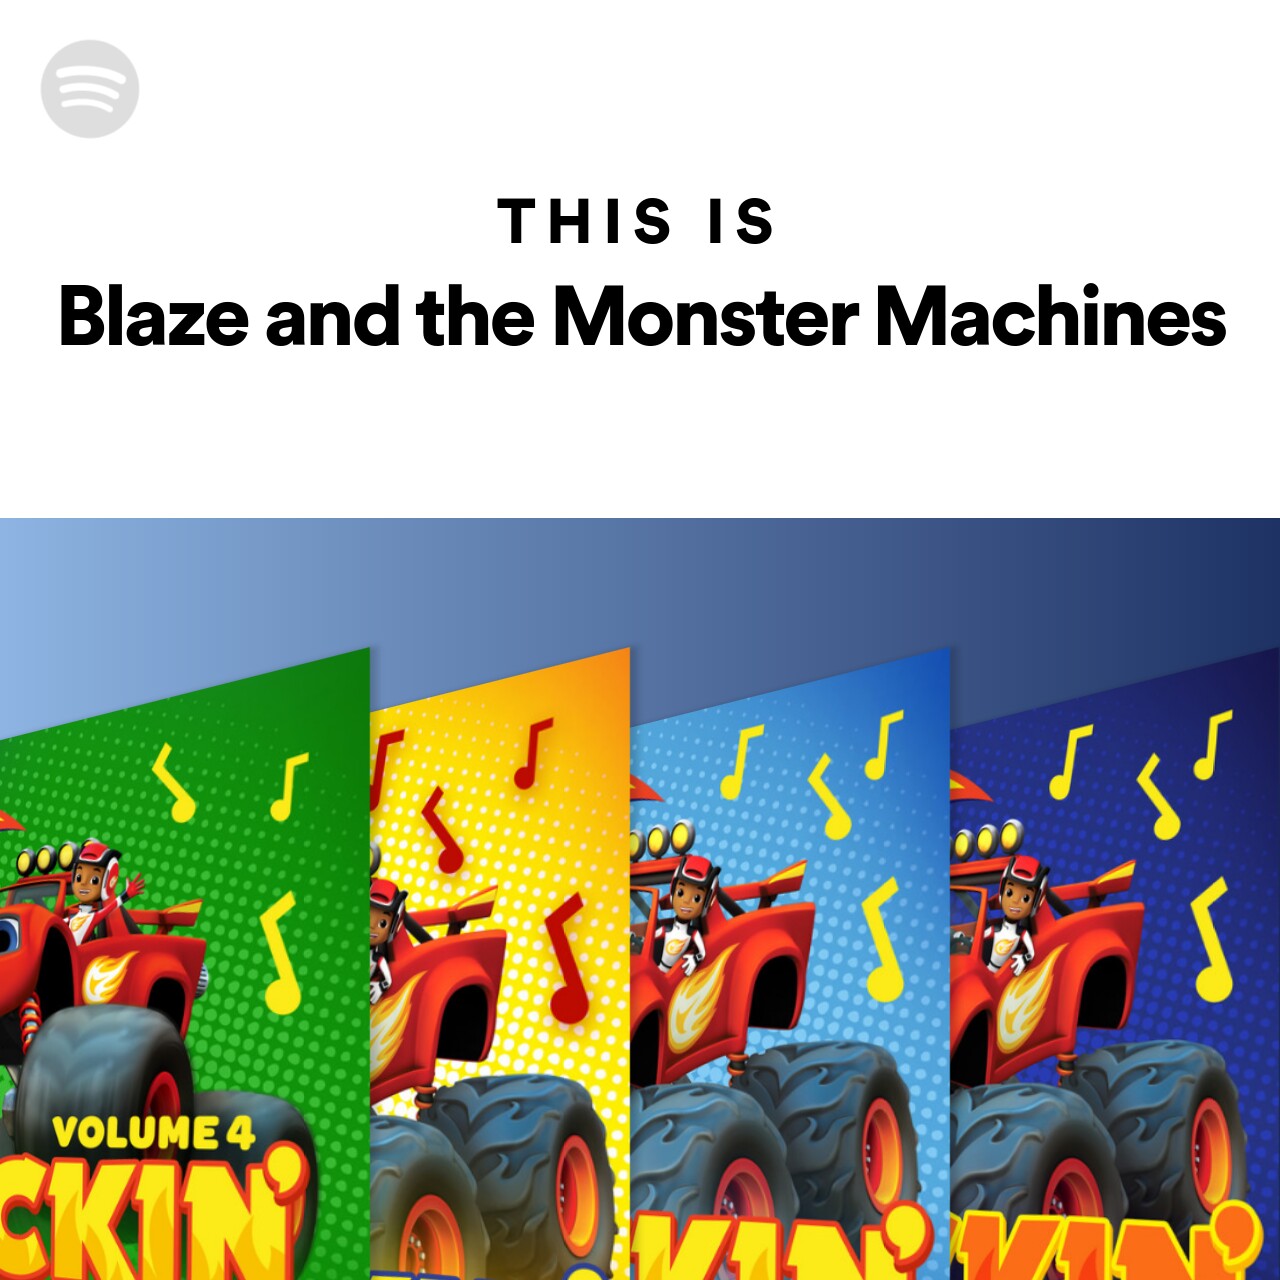 This Is Blaze and the Monster Machines